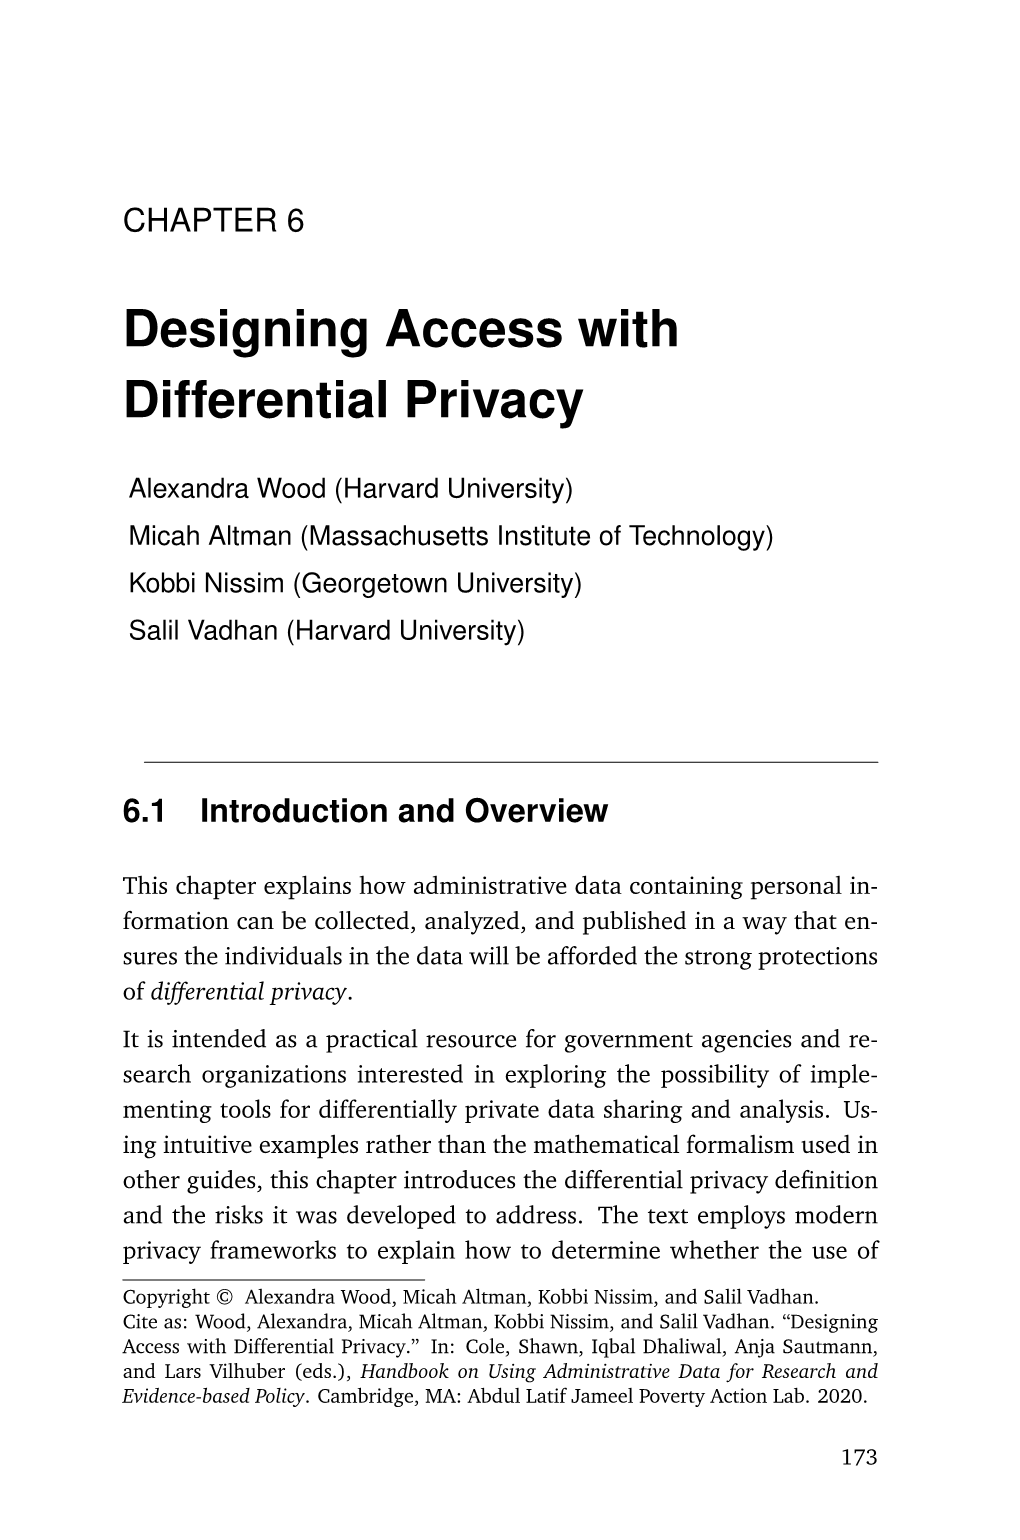 Designing Access with Differential Privacy